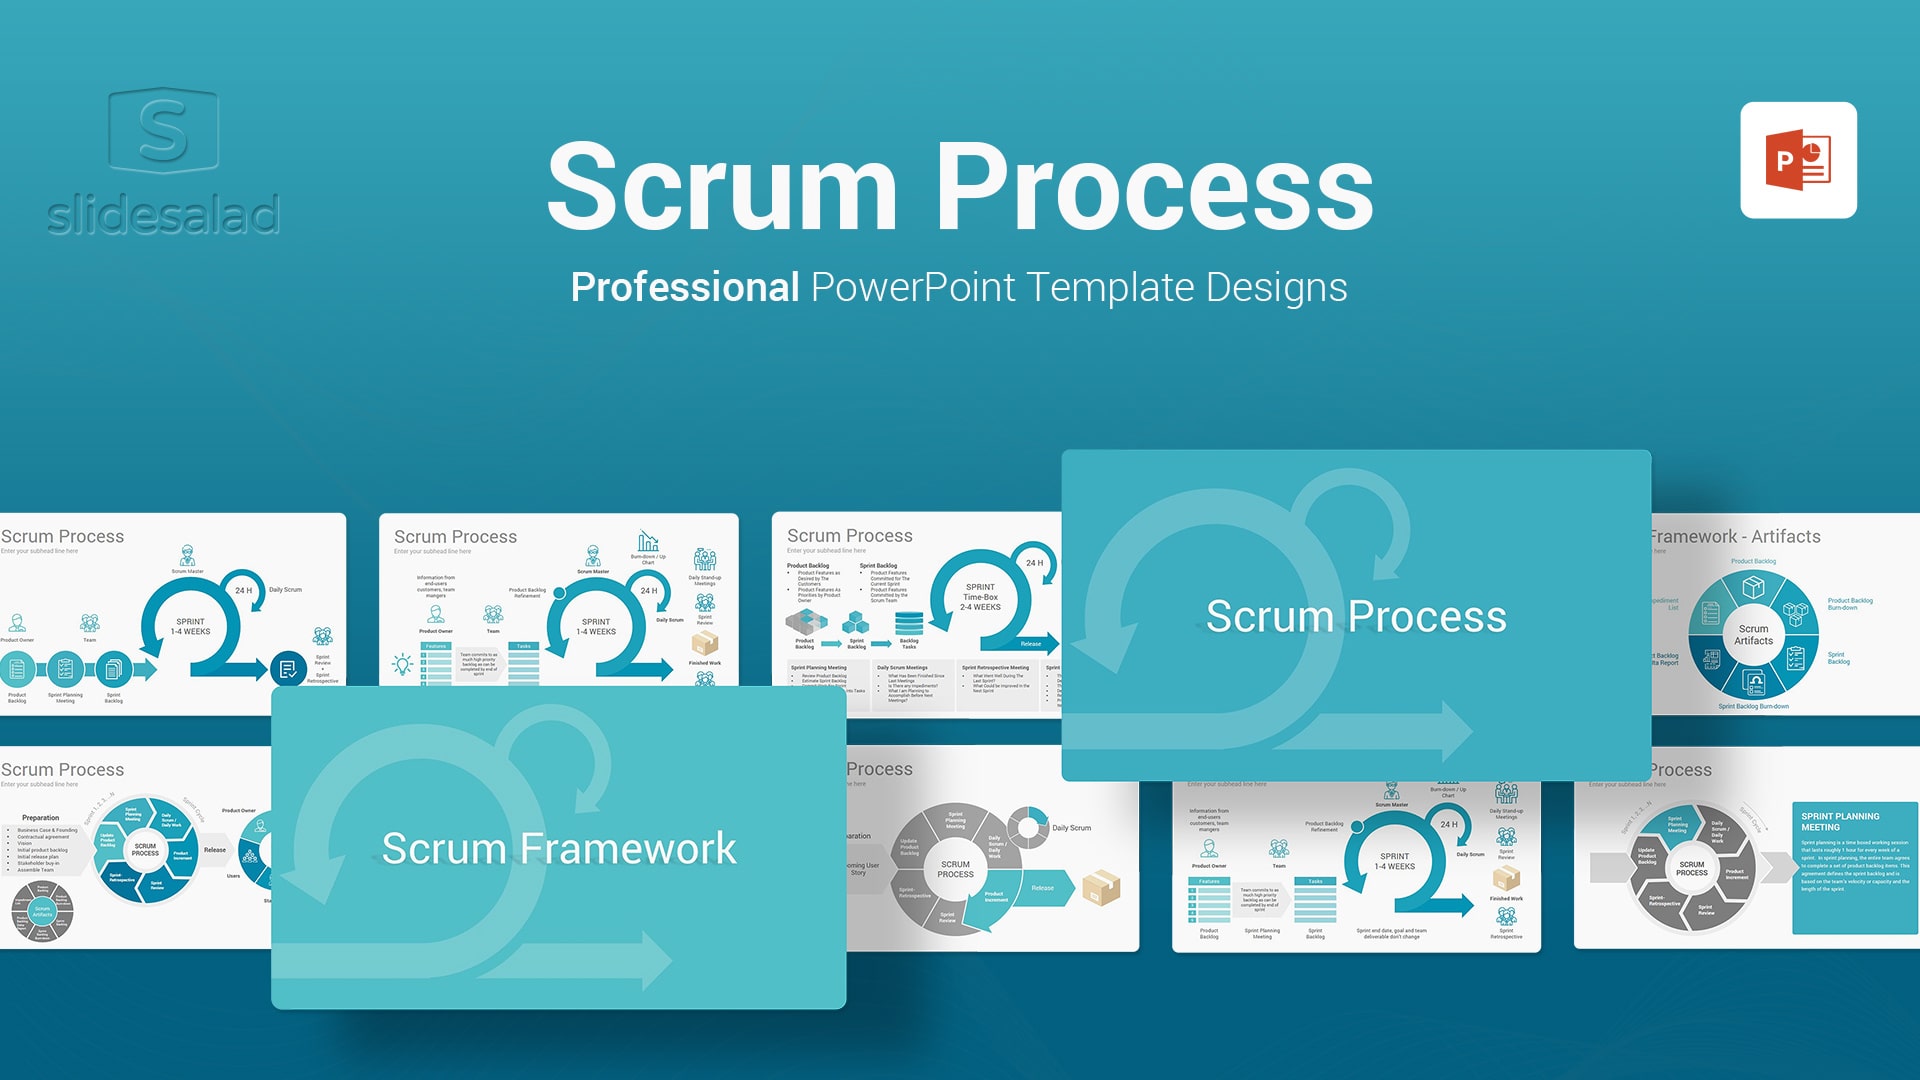 Scrum Process PowerPoint Presentation Template - Illustrate the Future of Software Development: Scrum using this Premium Information Technology PowerPoint Template